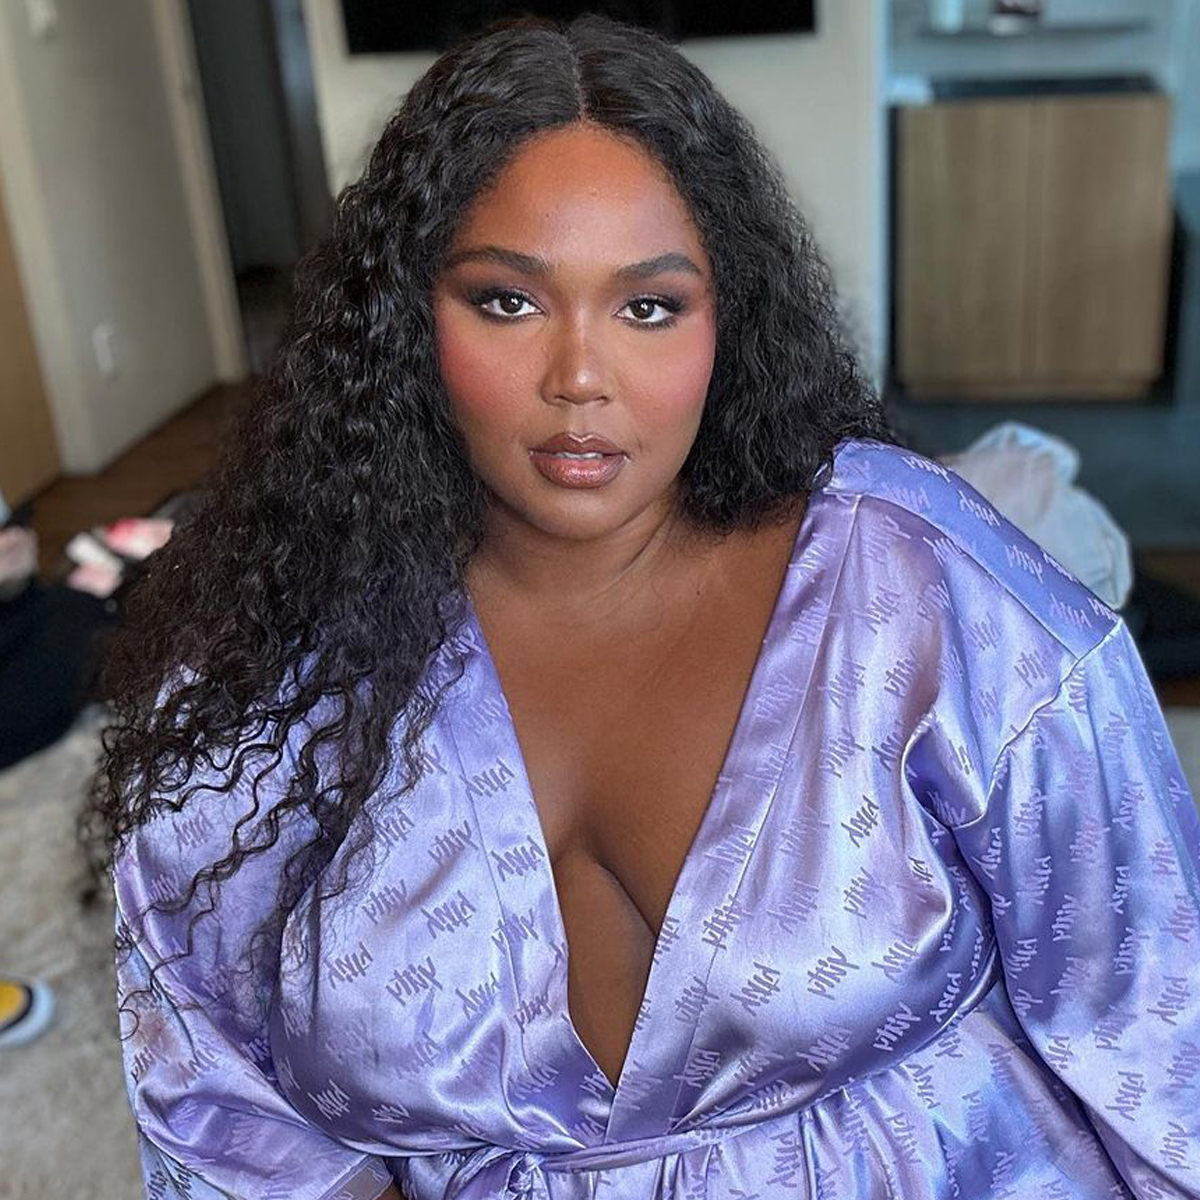 Lizzo boldly declares she's not trying to 'escape fatness